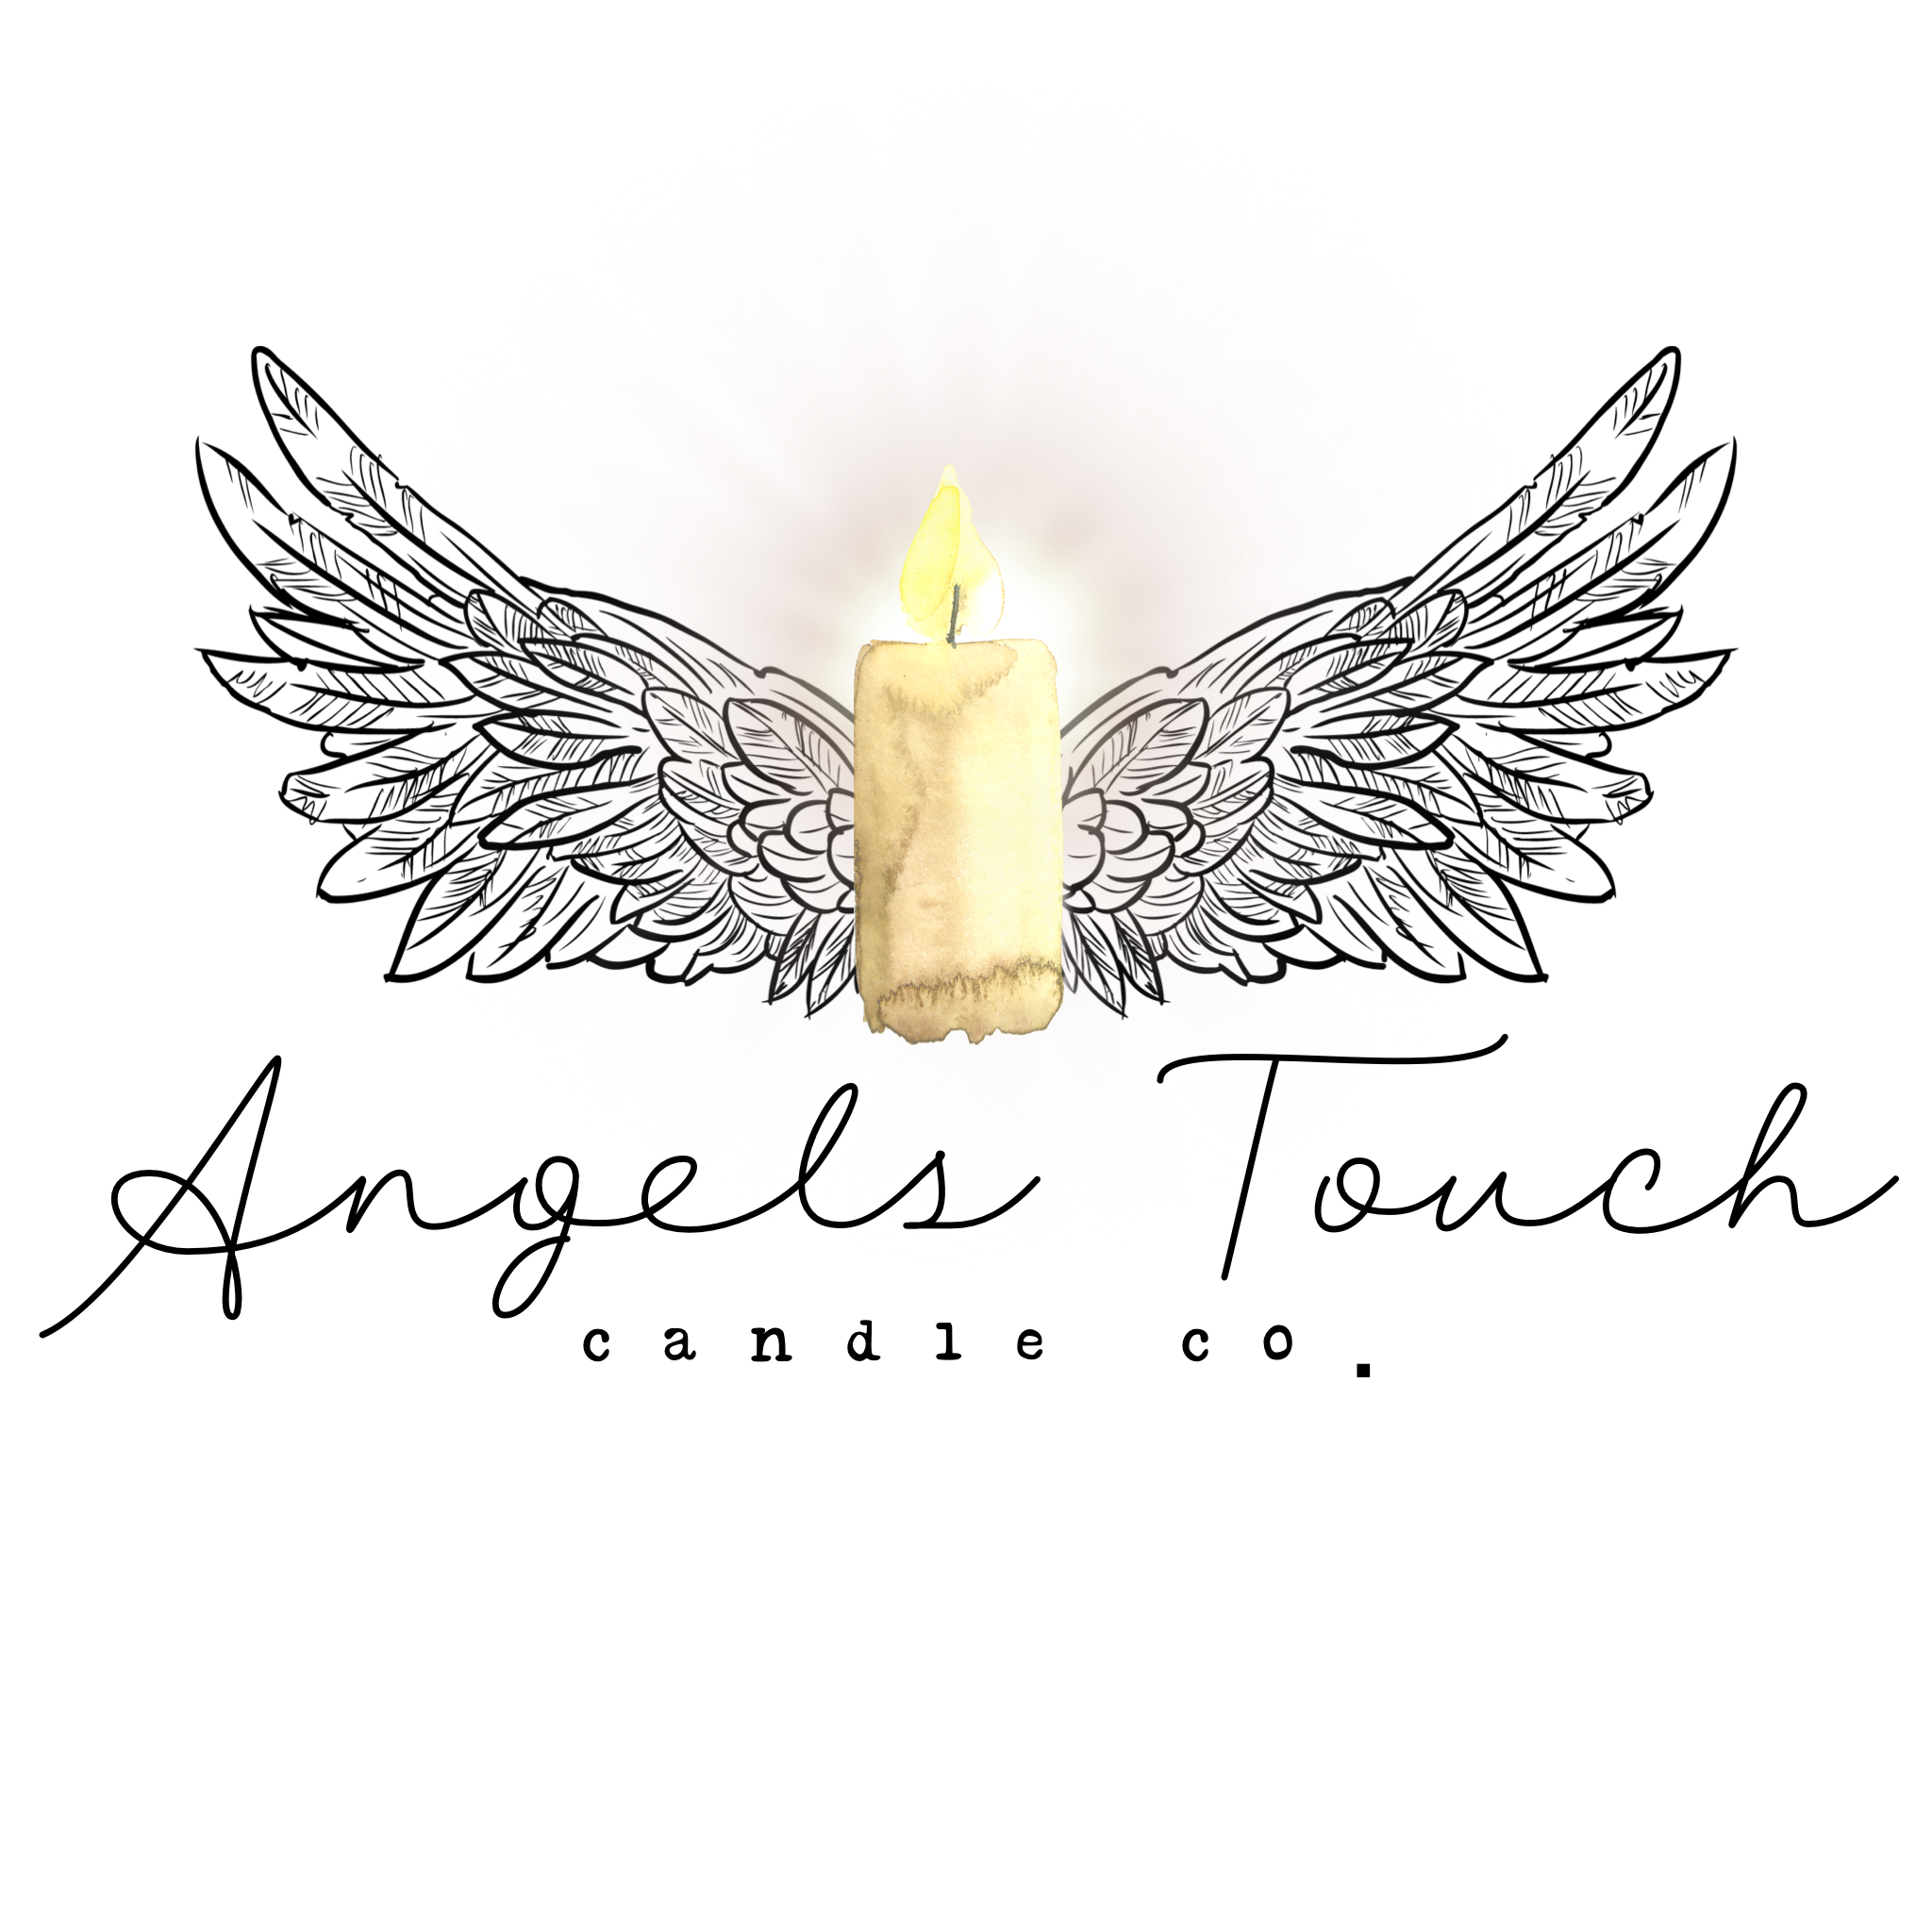 angels-touch-candle-co.